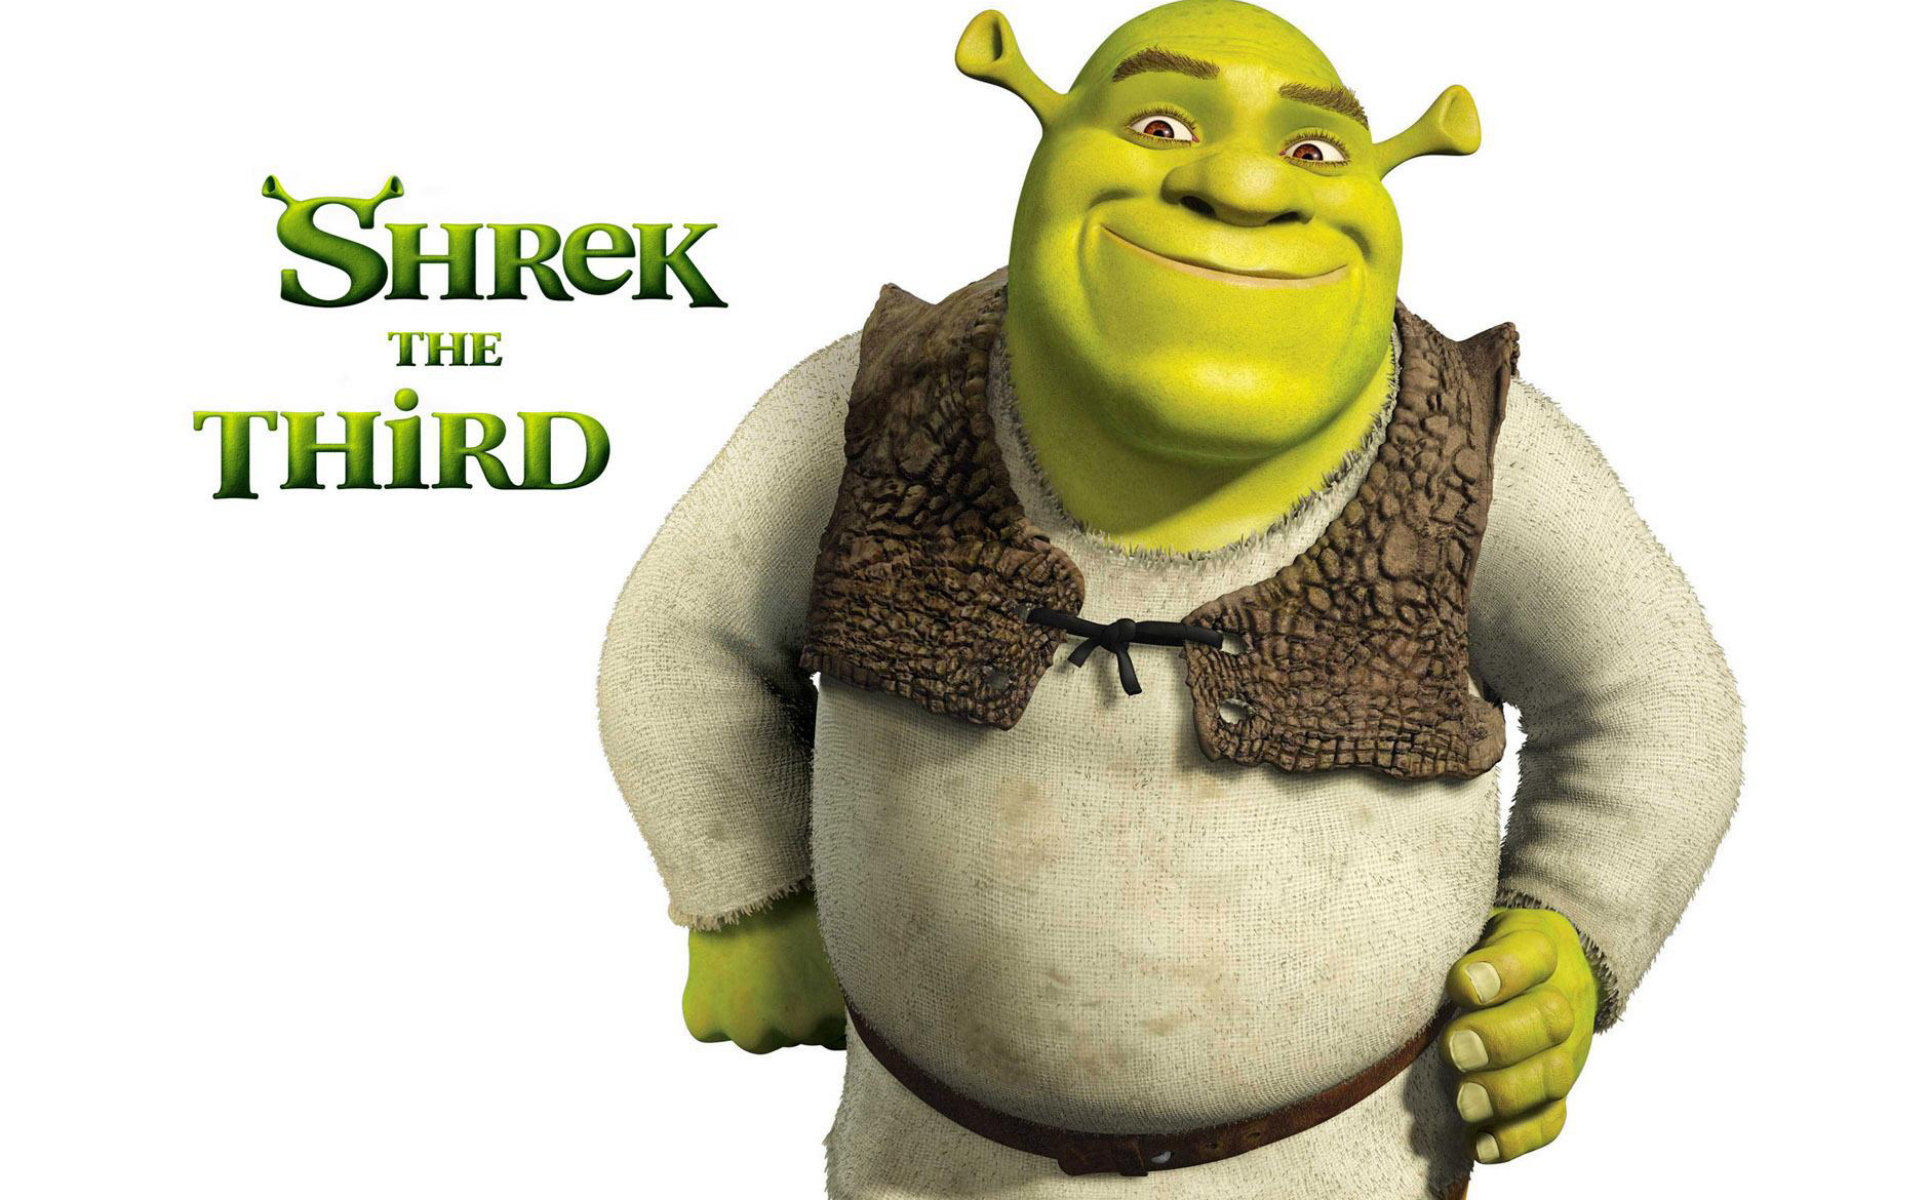 Shrek the Third download the new version